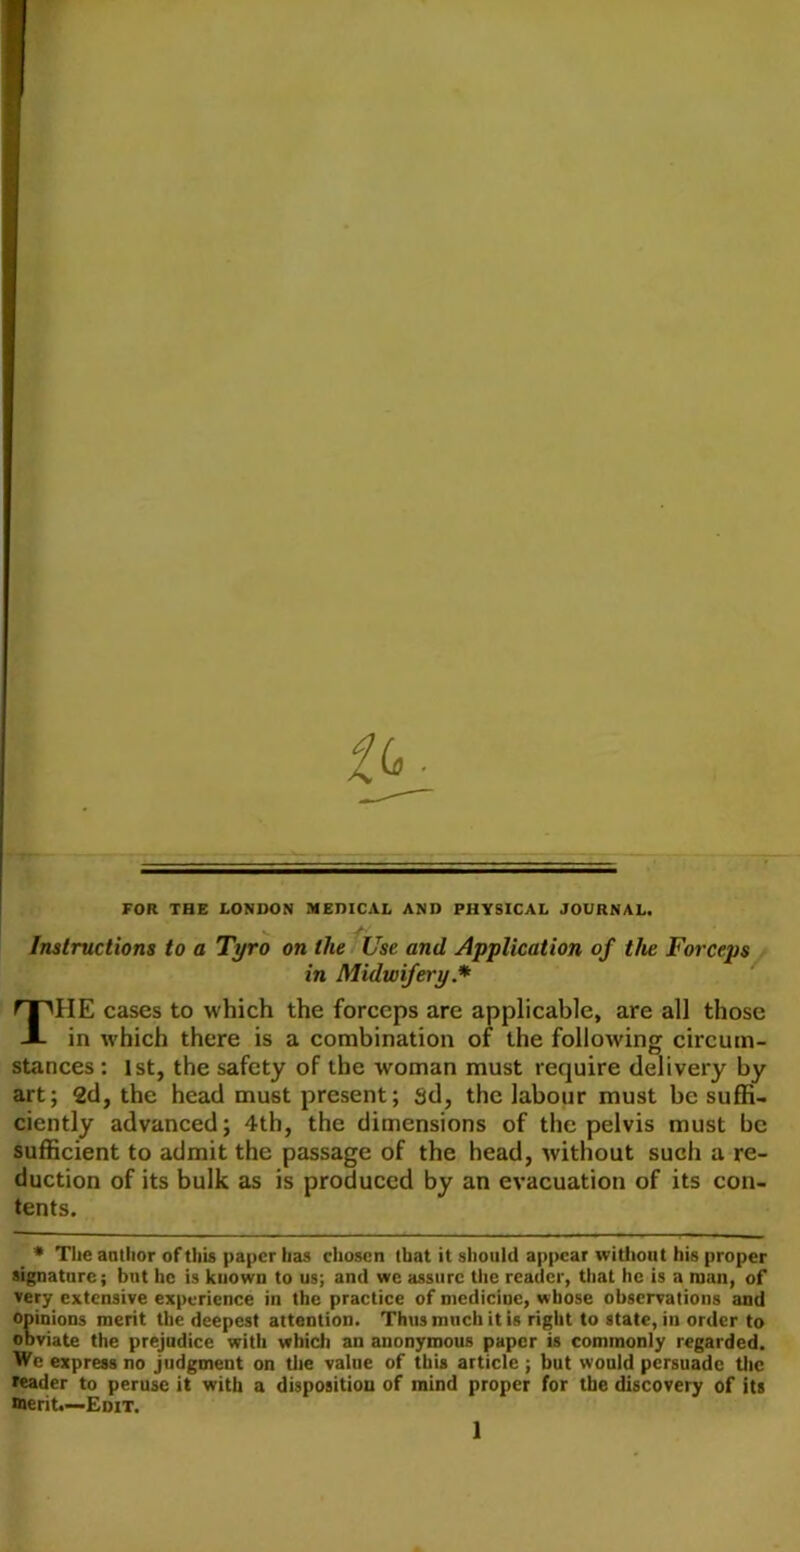 FOR THE LONDON MEDICAL AND PHYSICAL JOURNAL. ^ -f- Instructions to a Tyro on the Use and Application of the Forceps * in Midwifery.* The cases to which the forceps are applicable, are all those in which there is a combination of the following circum- stances : 1st, the safety of the woman must require delivery by art; 2d, the head must present; sd, the labour must be suffi- ciently advanced; 4th, the dimensions of the pelvis must be sufficient to admit the passage of the head, without such a re- duction of its bulk as is produced by an evacuation of its con- tents. * The aatlior of this paper has chosen (hat it should appear without his proper ugnatiirc; but he is known to us; and we assure the reader, that he is a man, of very extensive experience in the practice of medicine, whose observations and Opinions merit the deepest attention. Thus much it is right to state, in order to obviate the prejudice with which an anonymous paper is commonly regarded. We express no judgment on tlie value of this article ; but would persuade tlic leader to peruse it with a disposition of mind proper for the discovery of its merit.—-Edit.